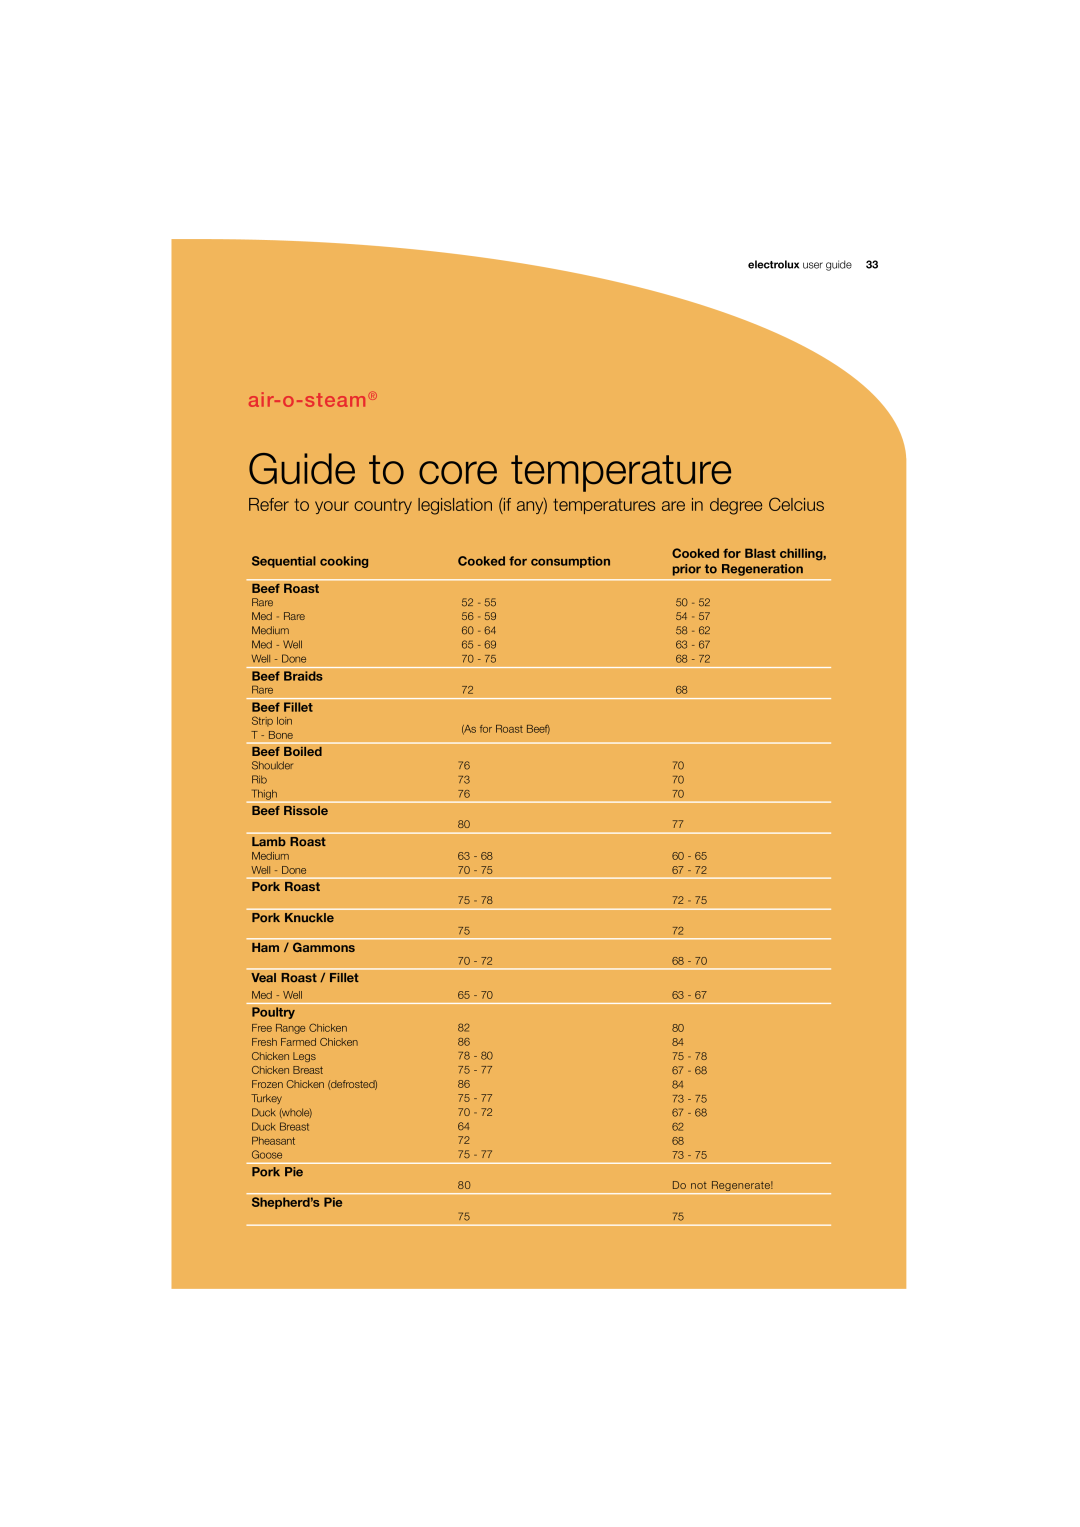 Electrolux 180 manual Guide to core temperature, air-o-steam 